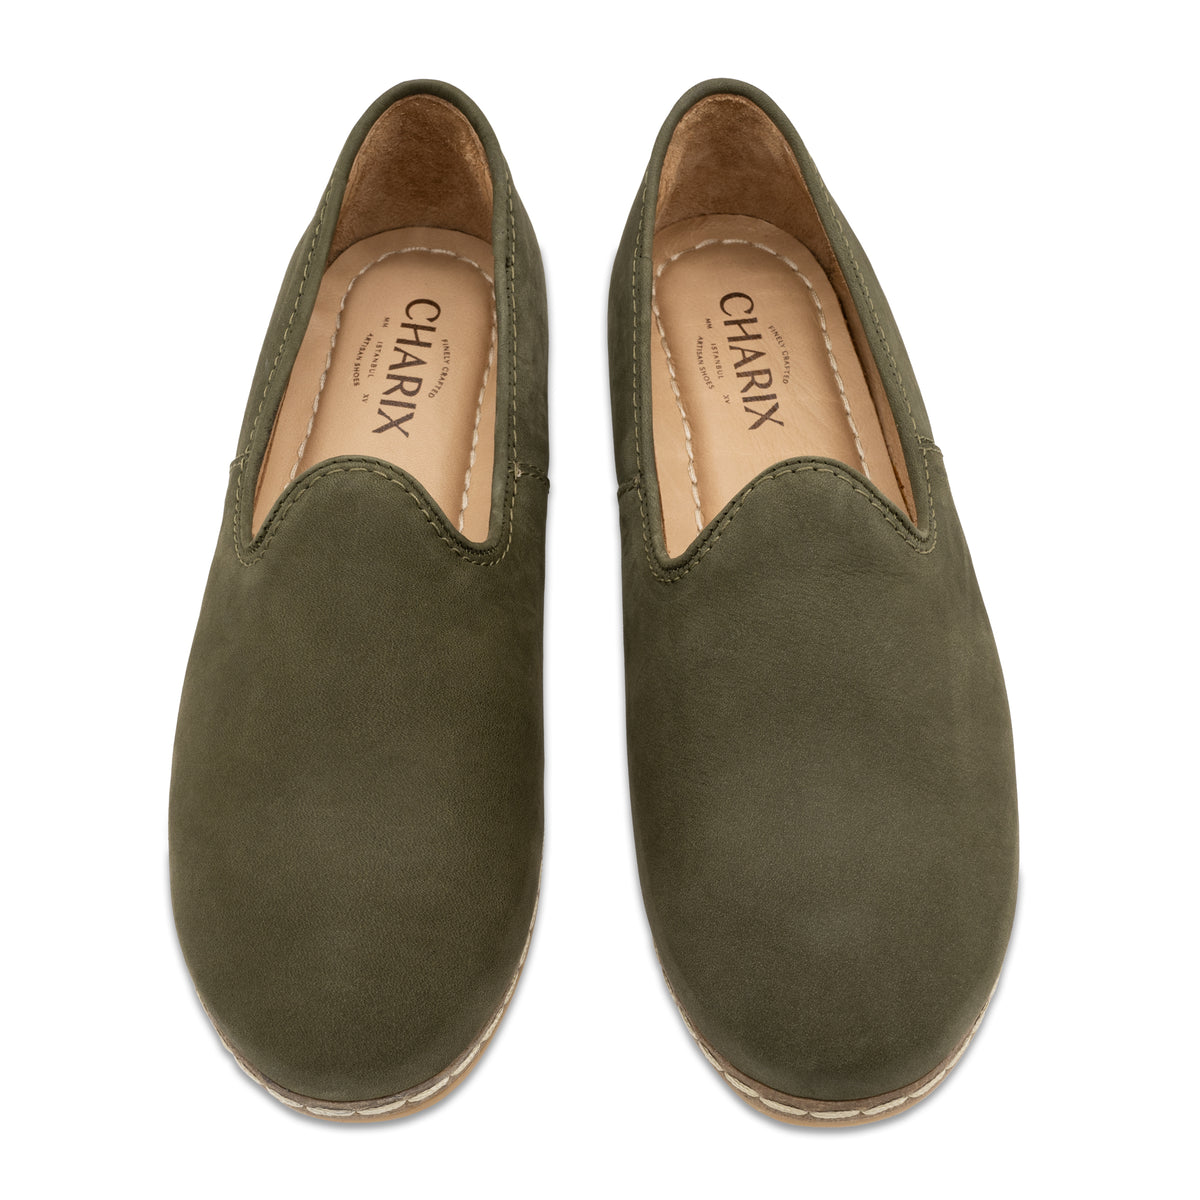 Olive Suede Slip On Shoes